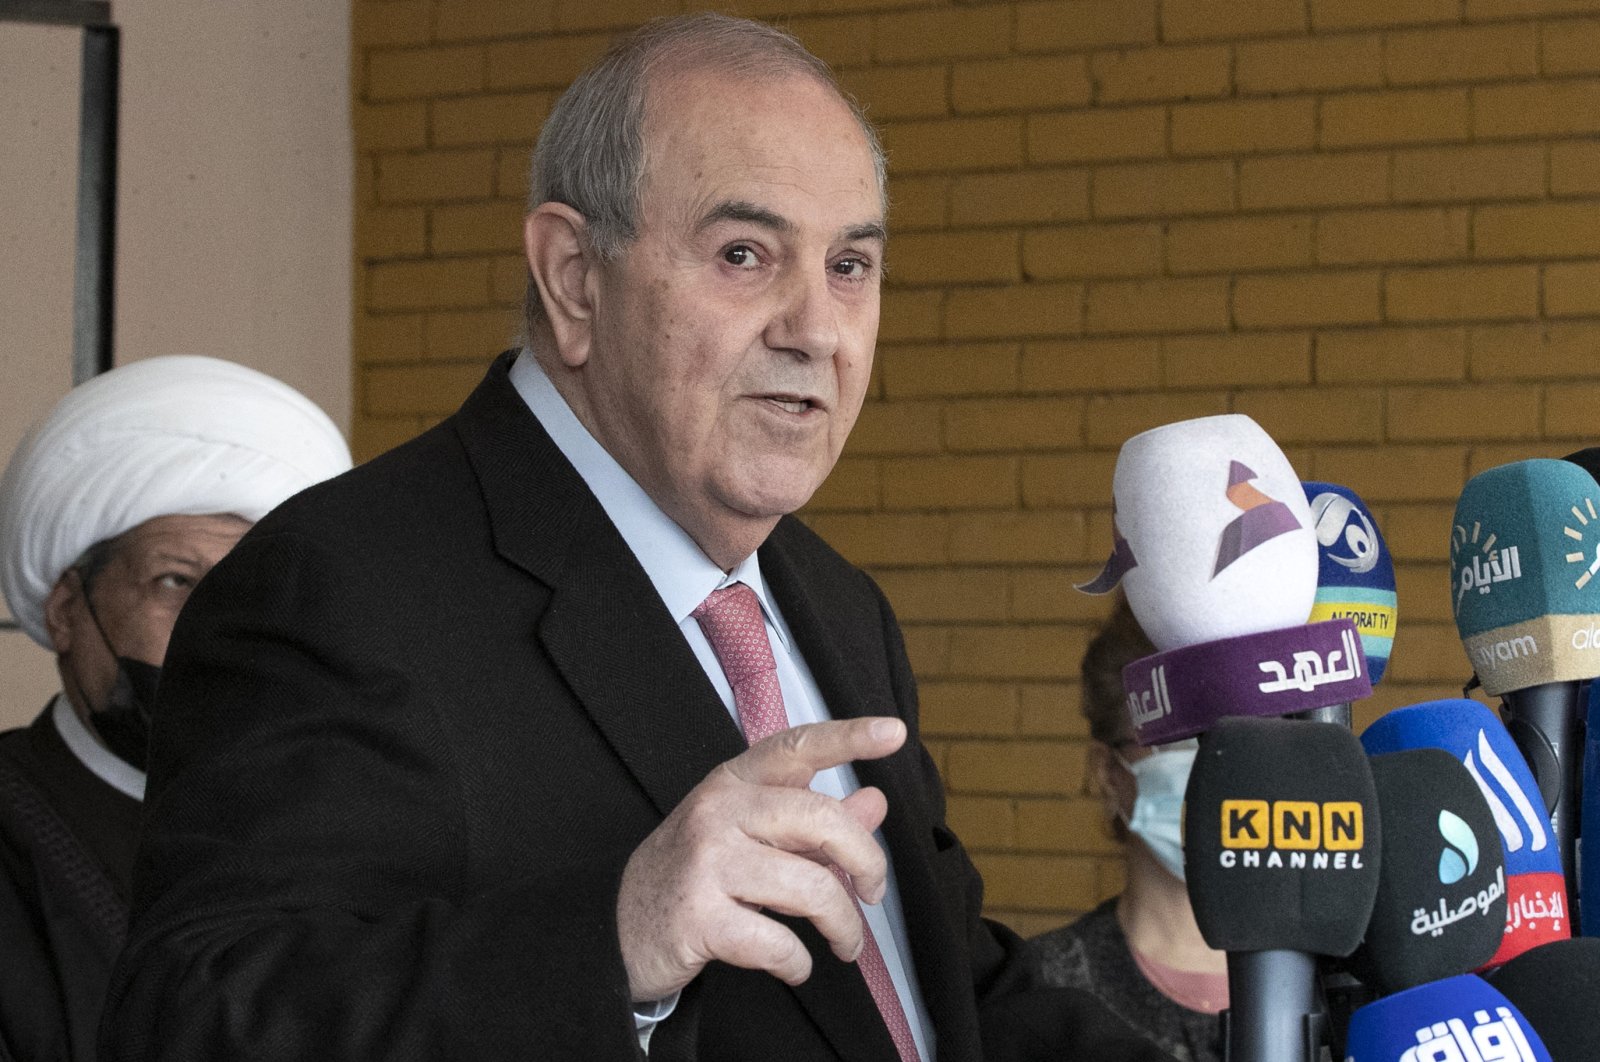 Ayad Allawi, Iraqi politician and former vice president and interim prime minister, gives a press conference in the capital Baghdad on January 31, 2022. (Photo by Sabah ARAR / AFP)